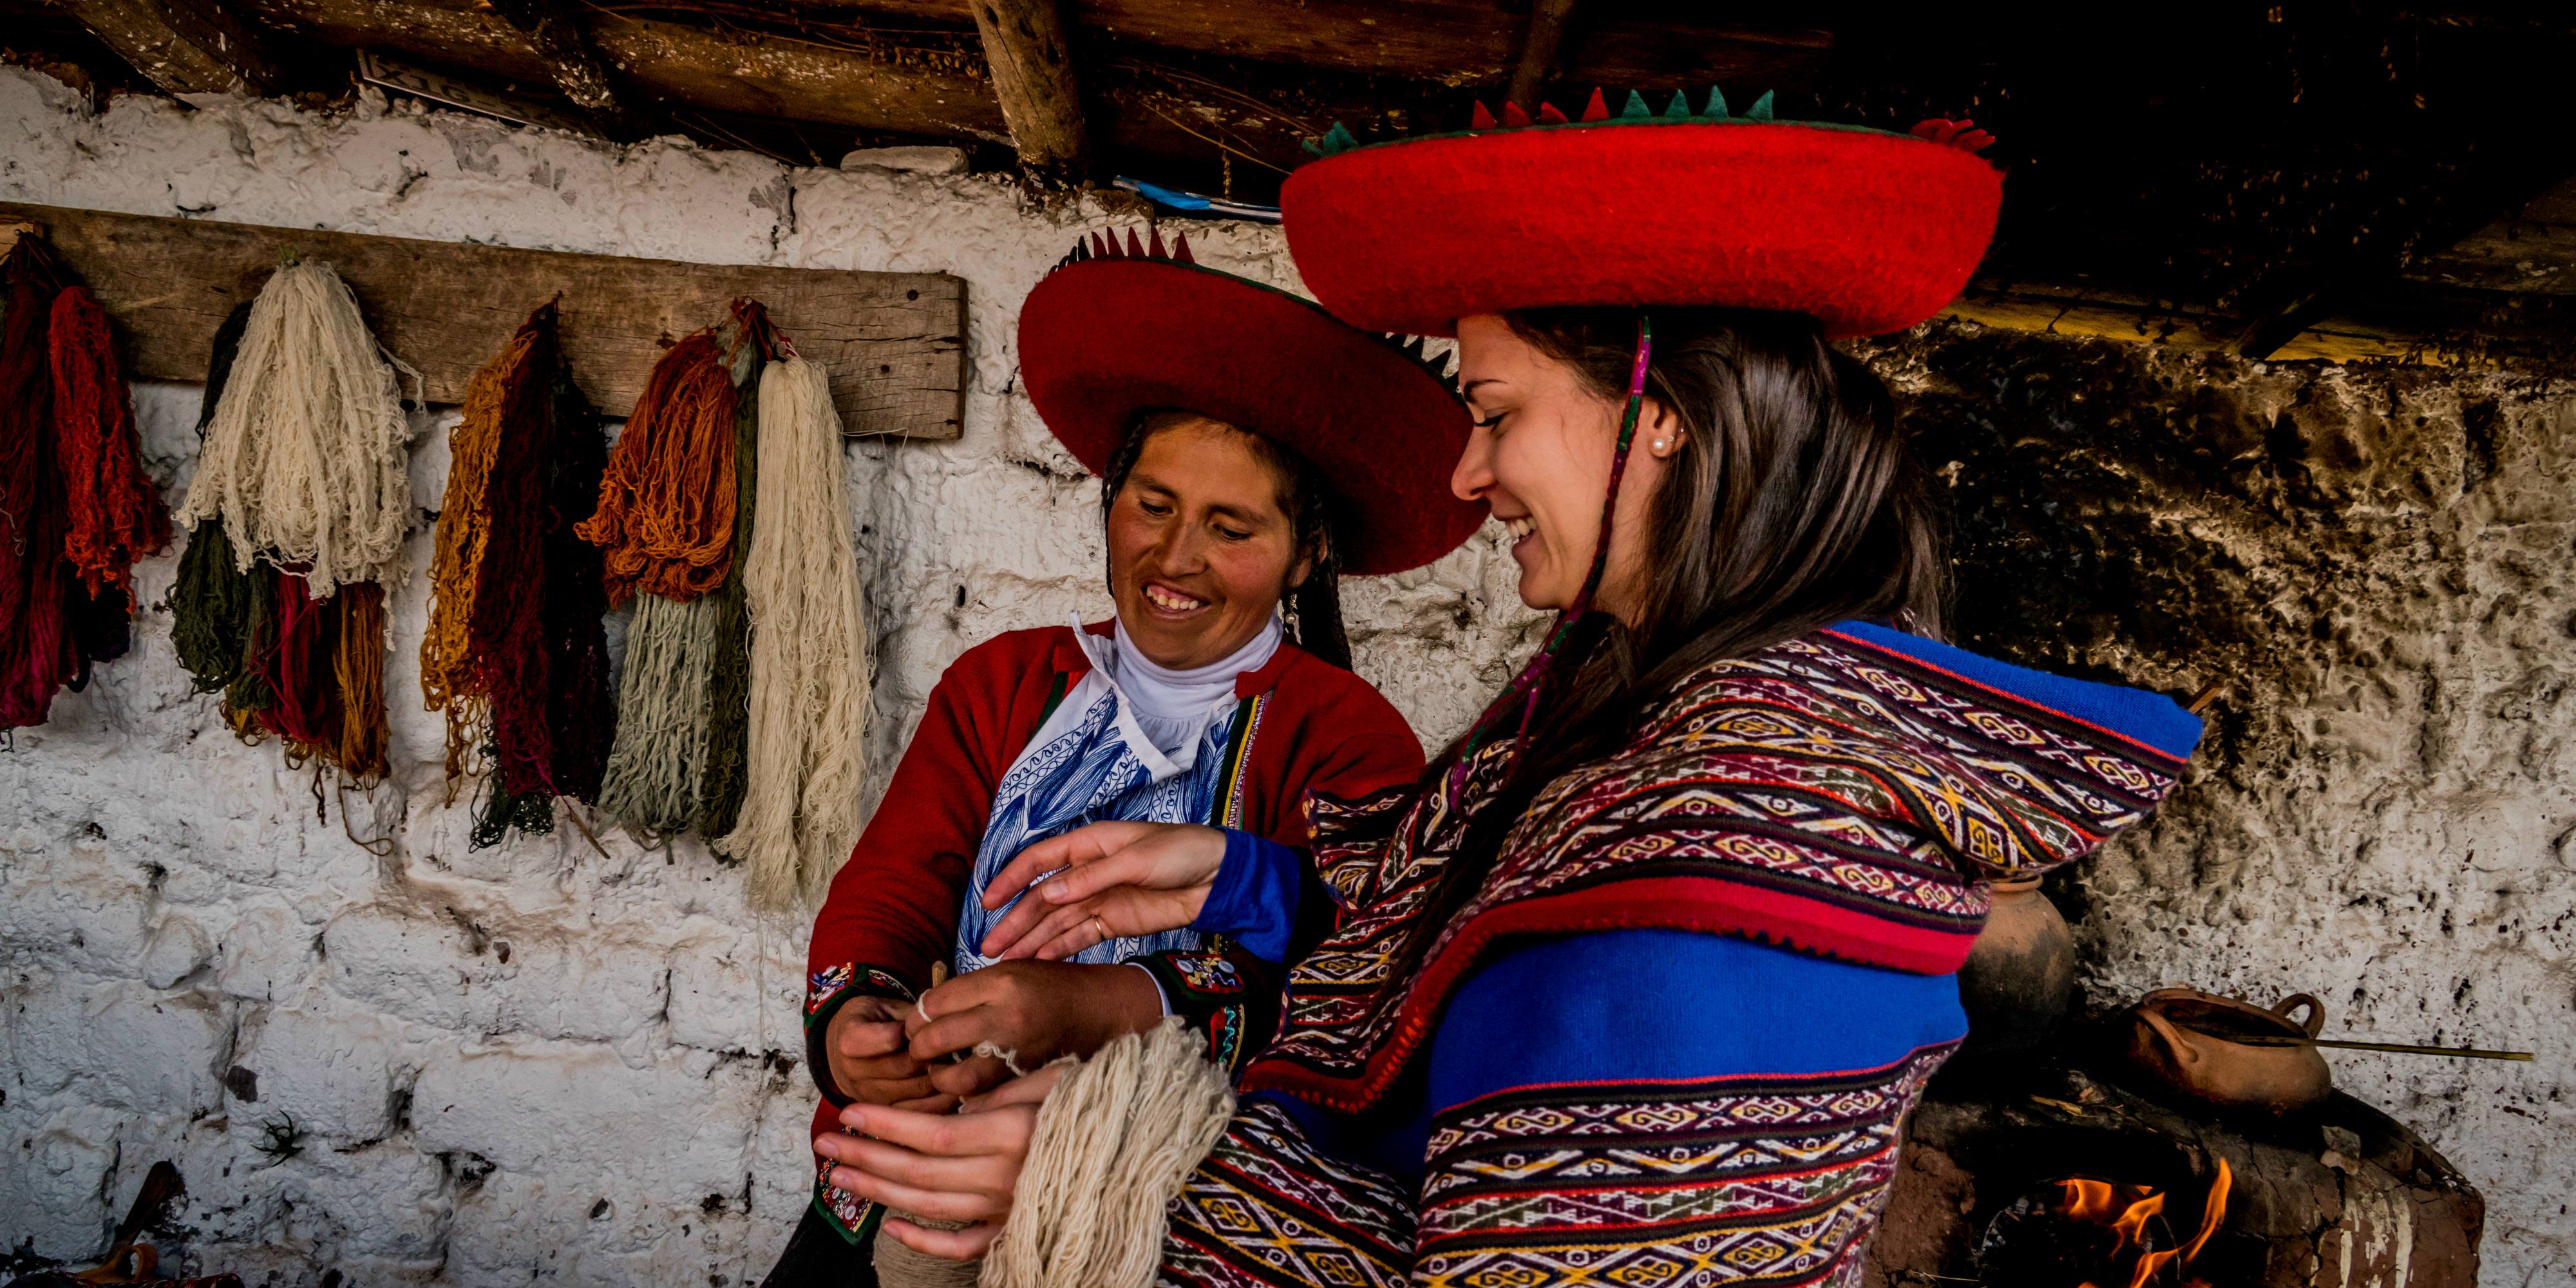 A GVI participant learns about dying wool in Cusco, Peru. As part of community development internships abroad, participants help facilitate business and skills development workshops. 